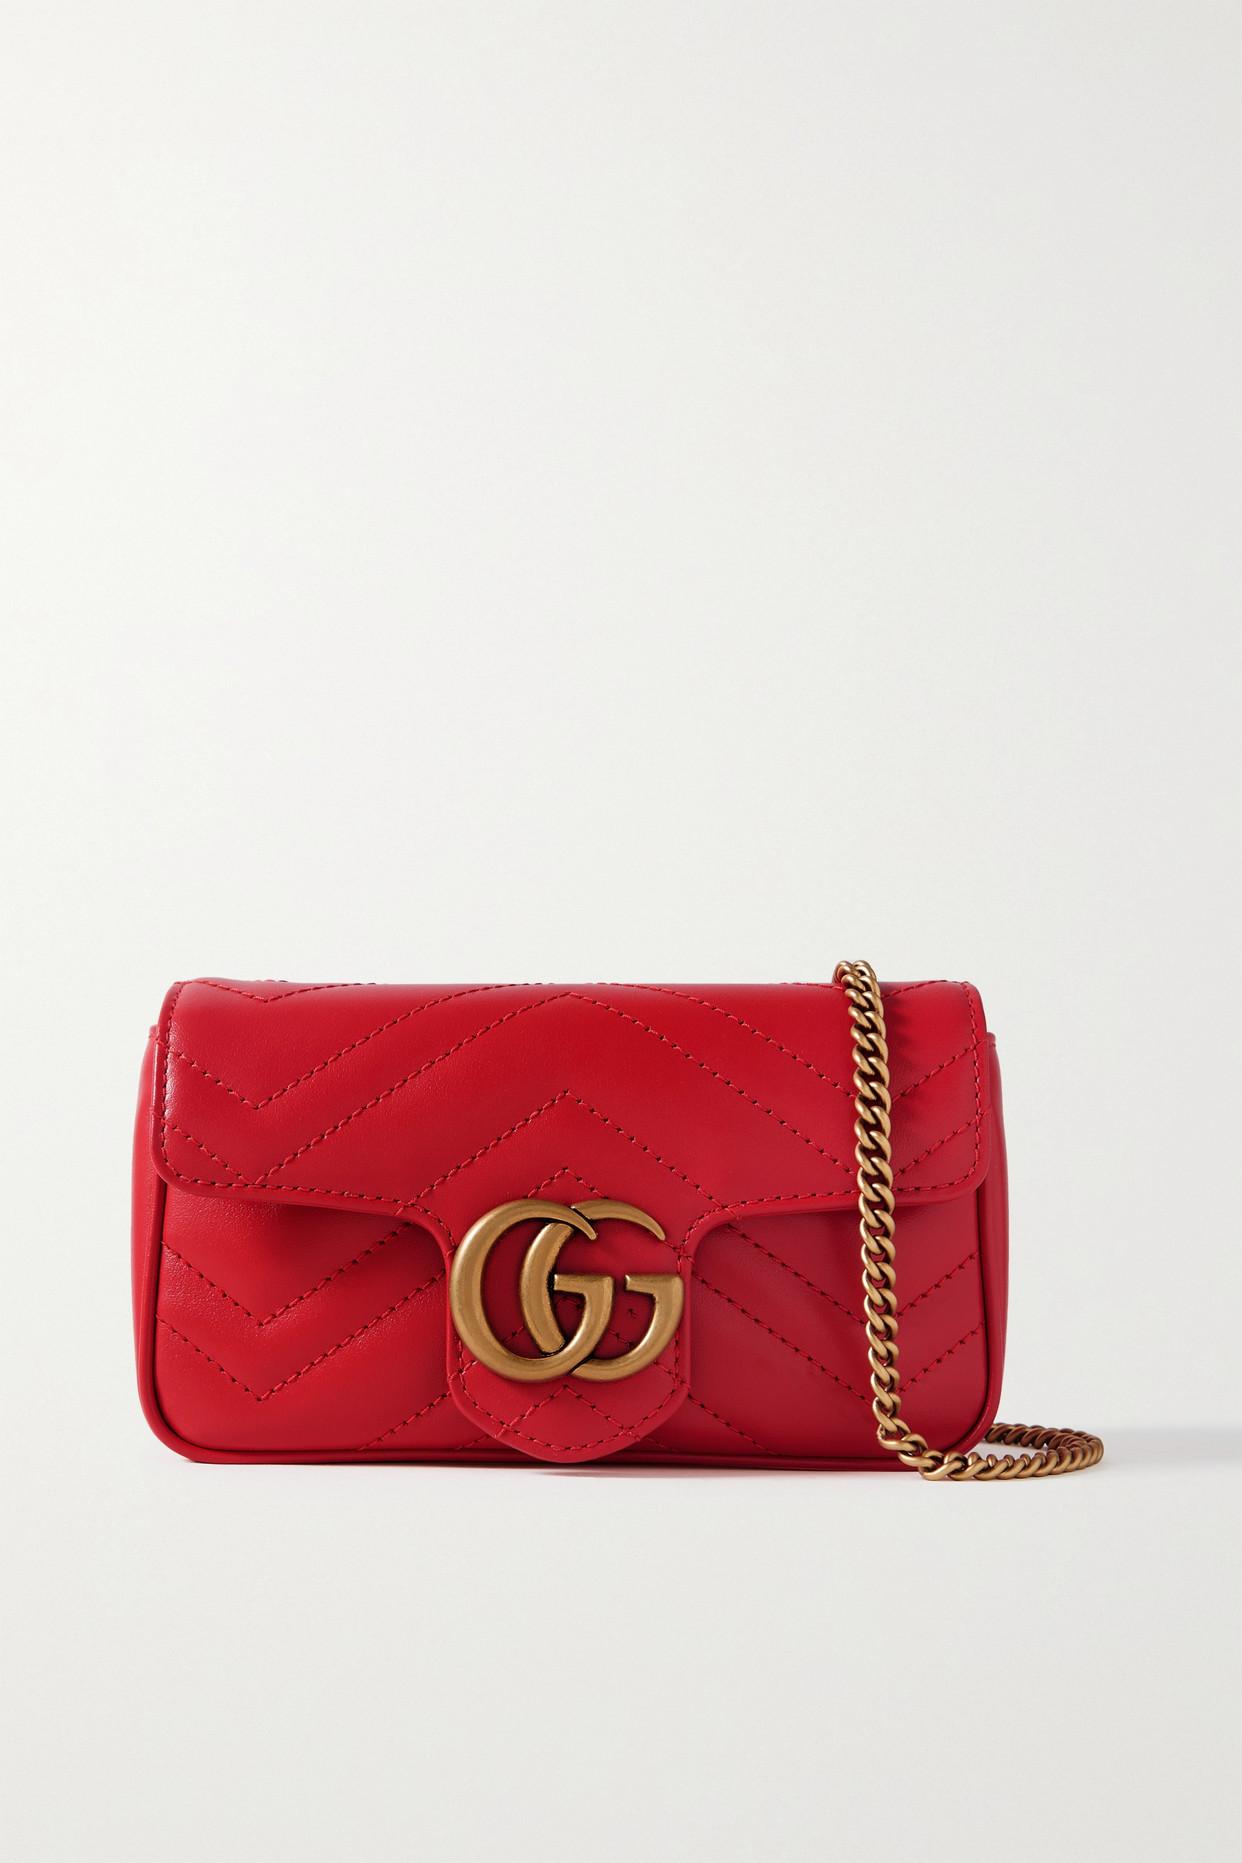 Gucci Gg Marmont Quilted Leather Shoulder Bag in Red | Lyst